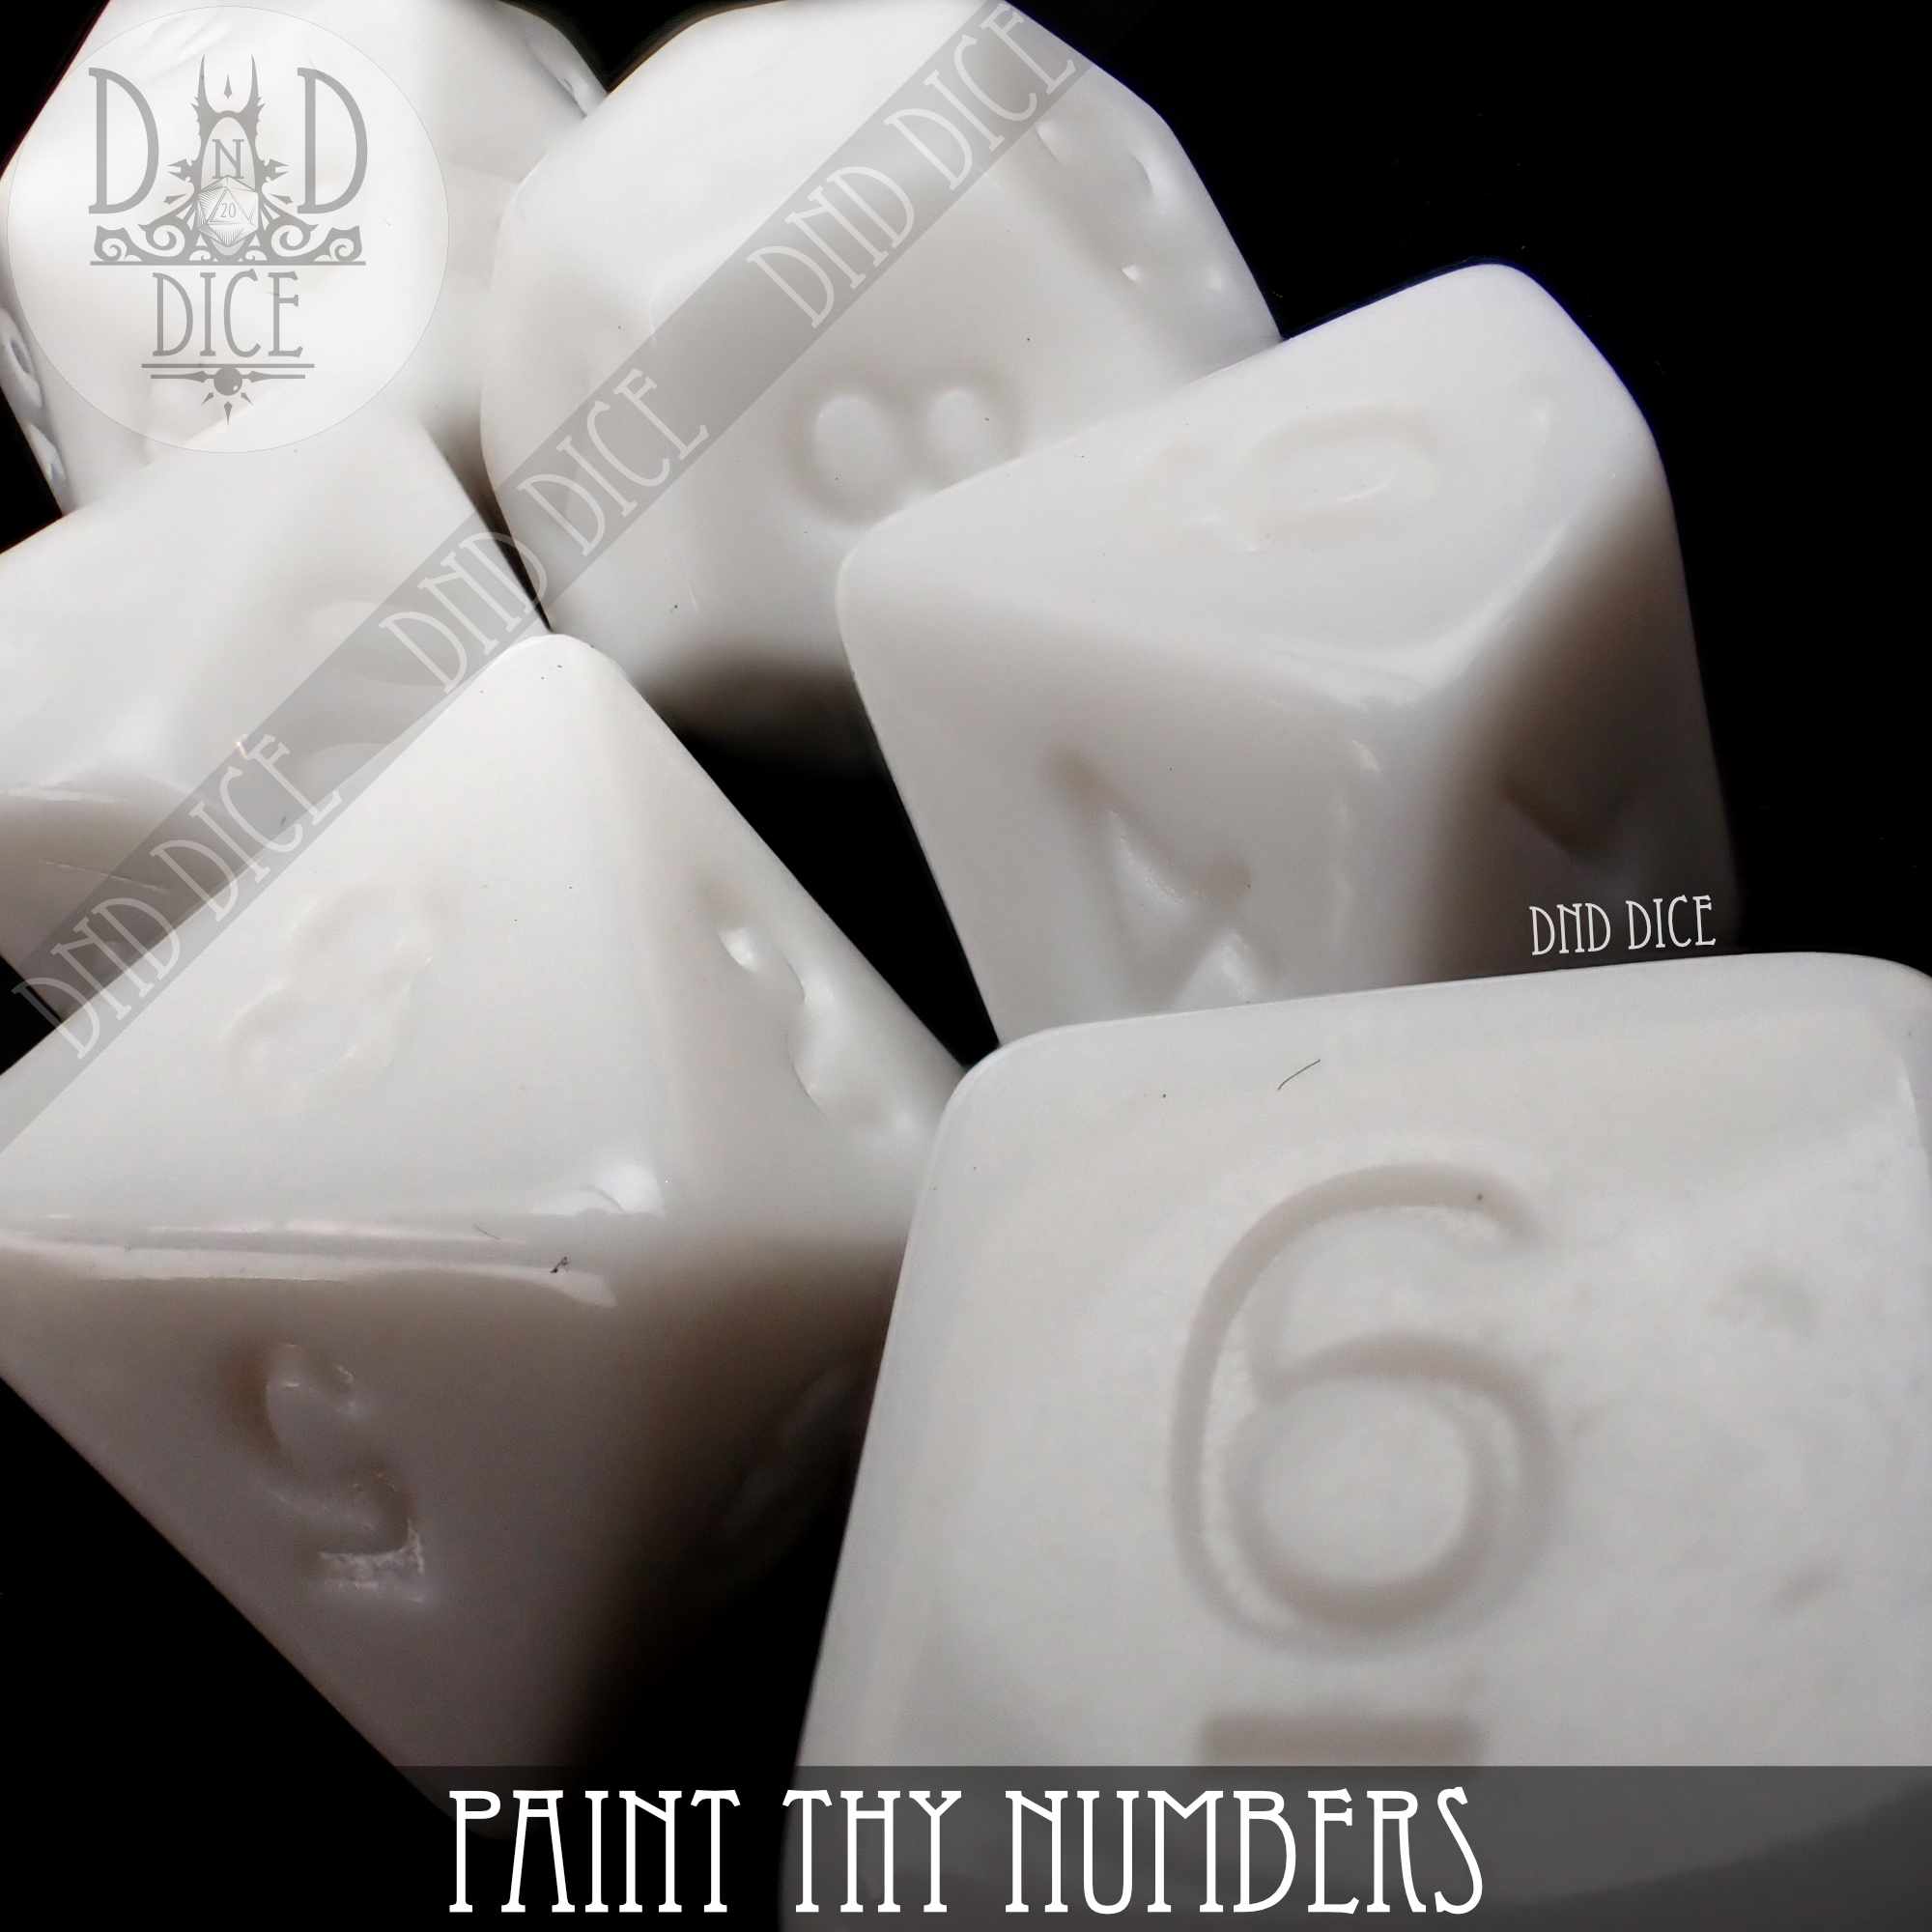 Paint Thy Numbers Dice Set